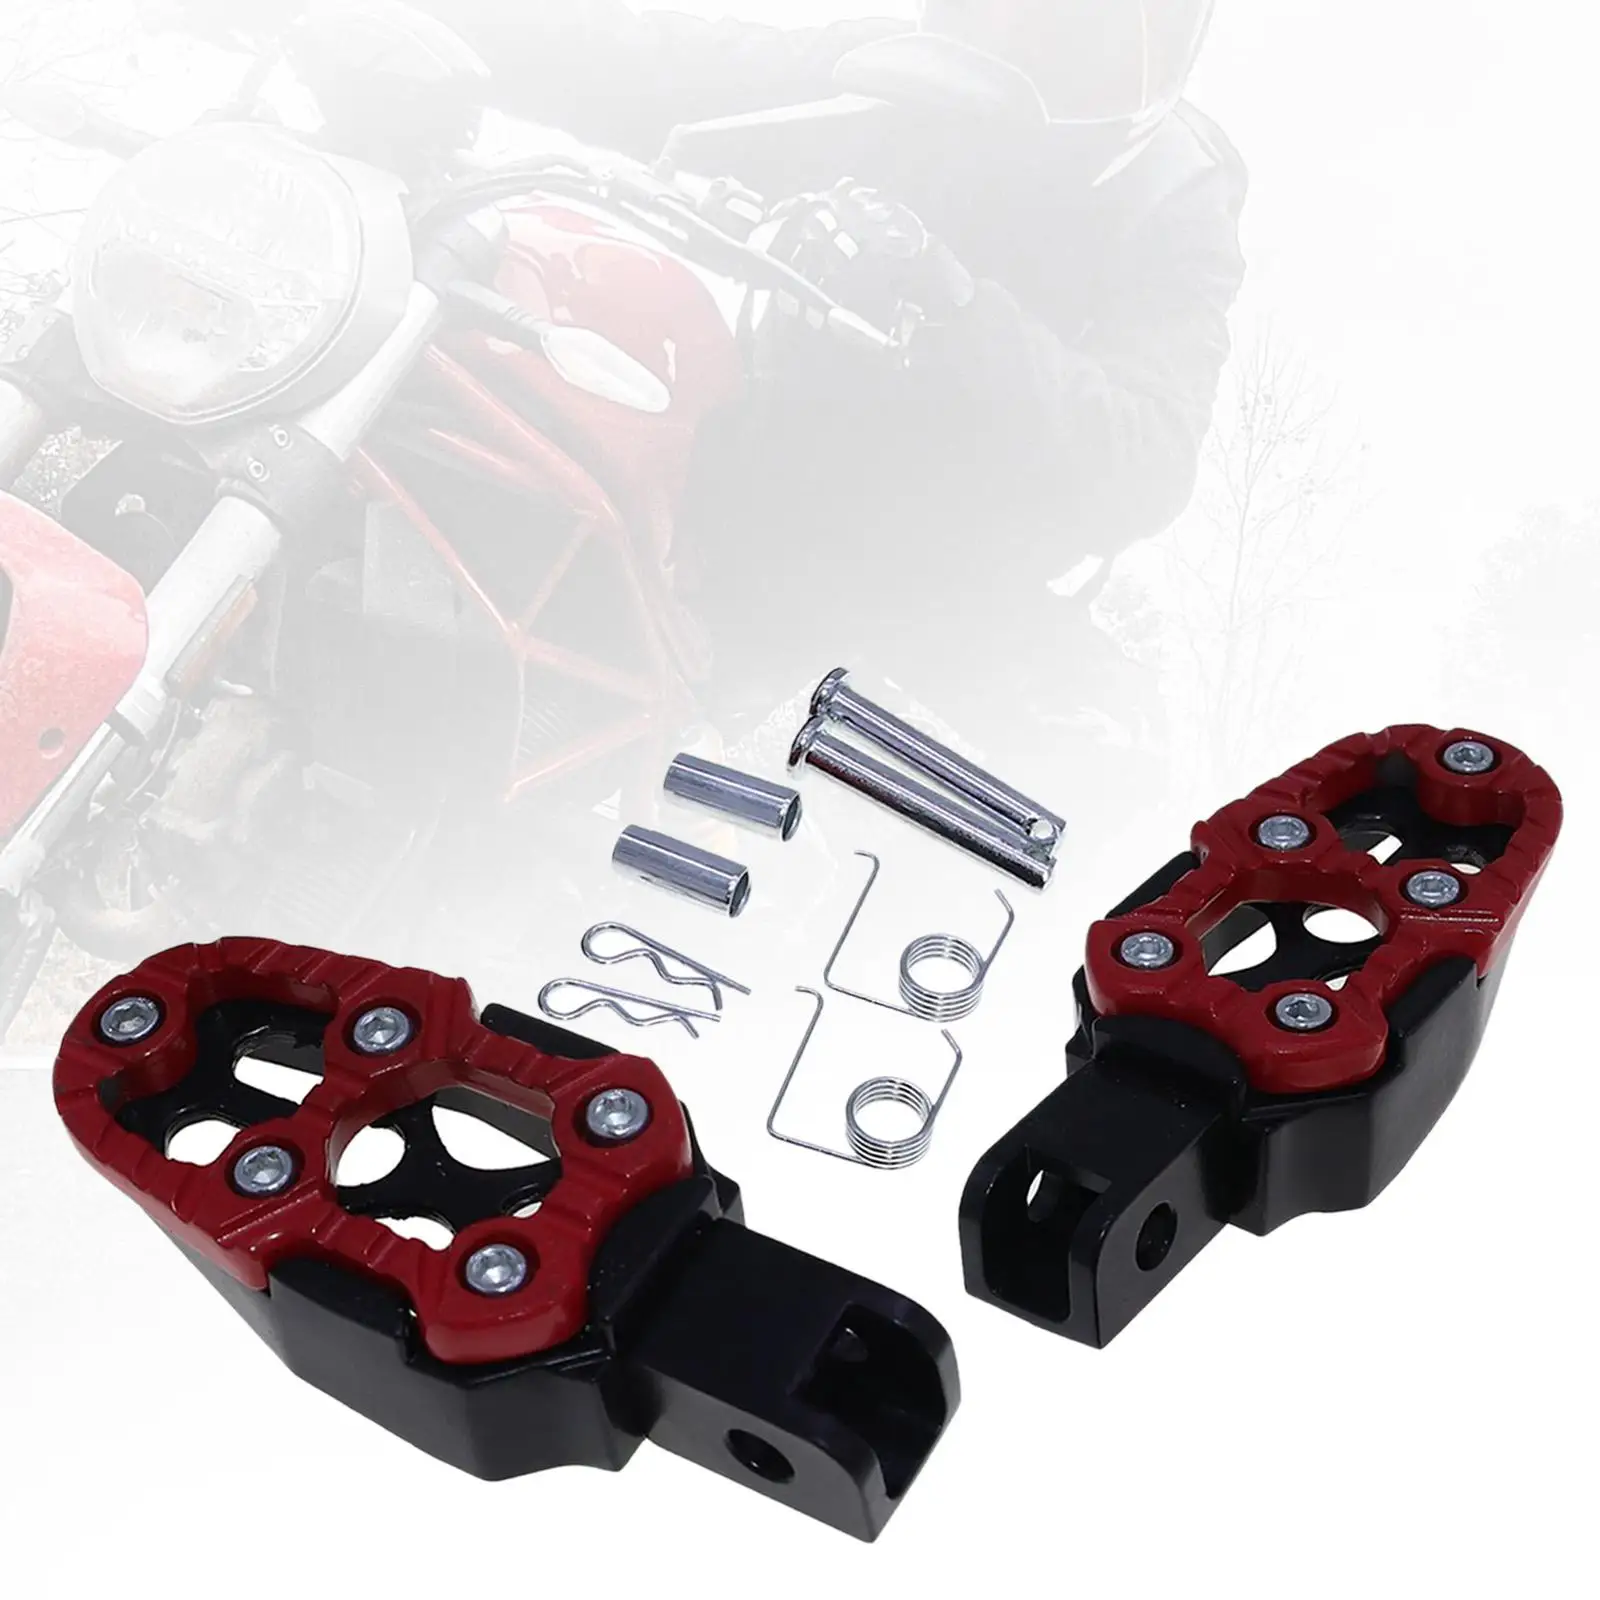 Foot Pedals Rests Durable Aluminum Alloy bike Replaces Easy to Install Professional Portable Motorcycle Back Foot Pegs